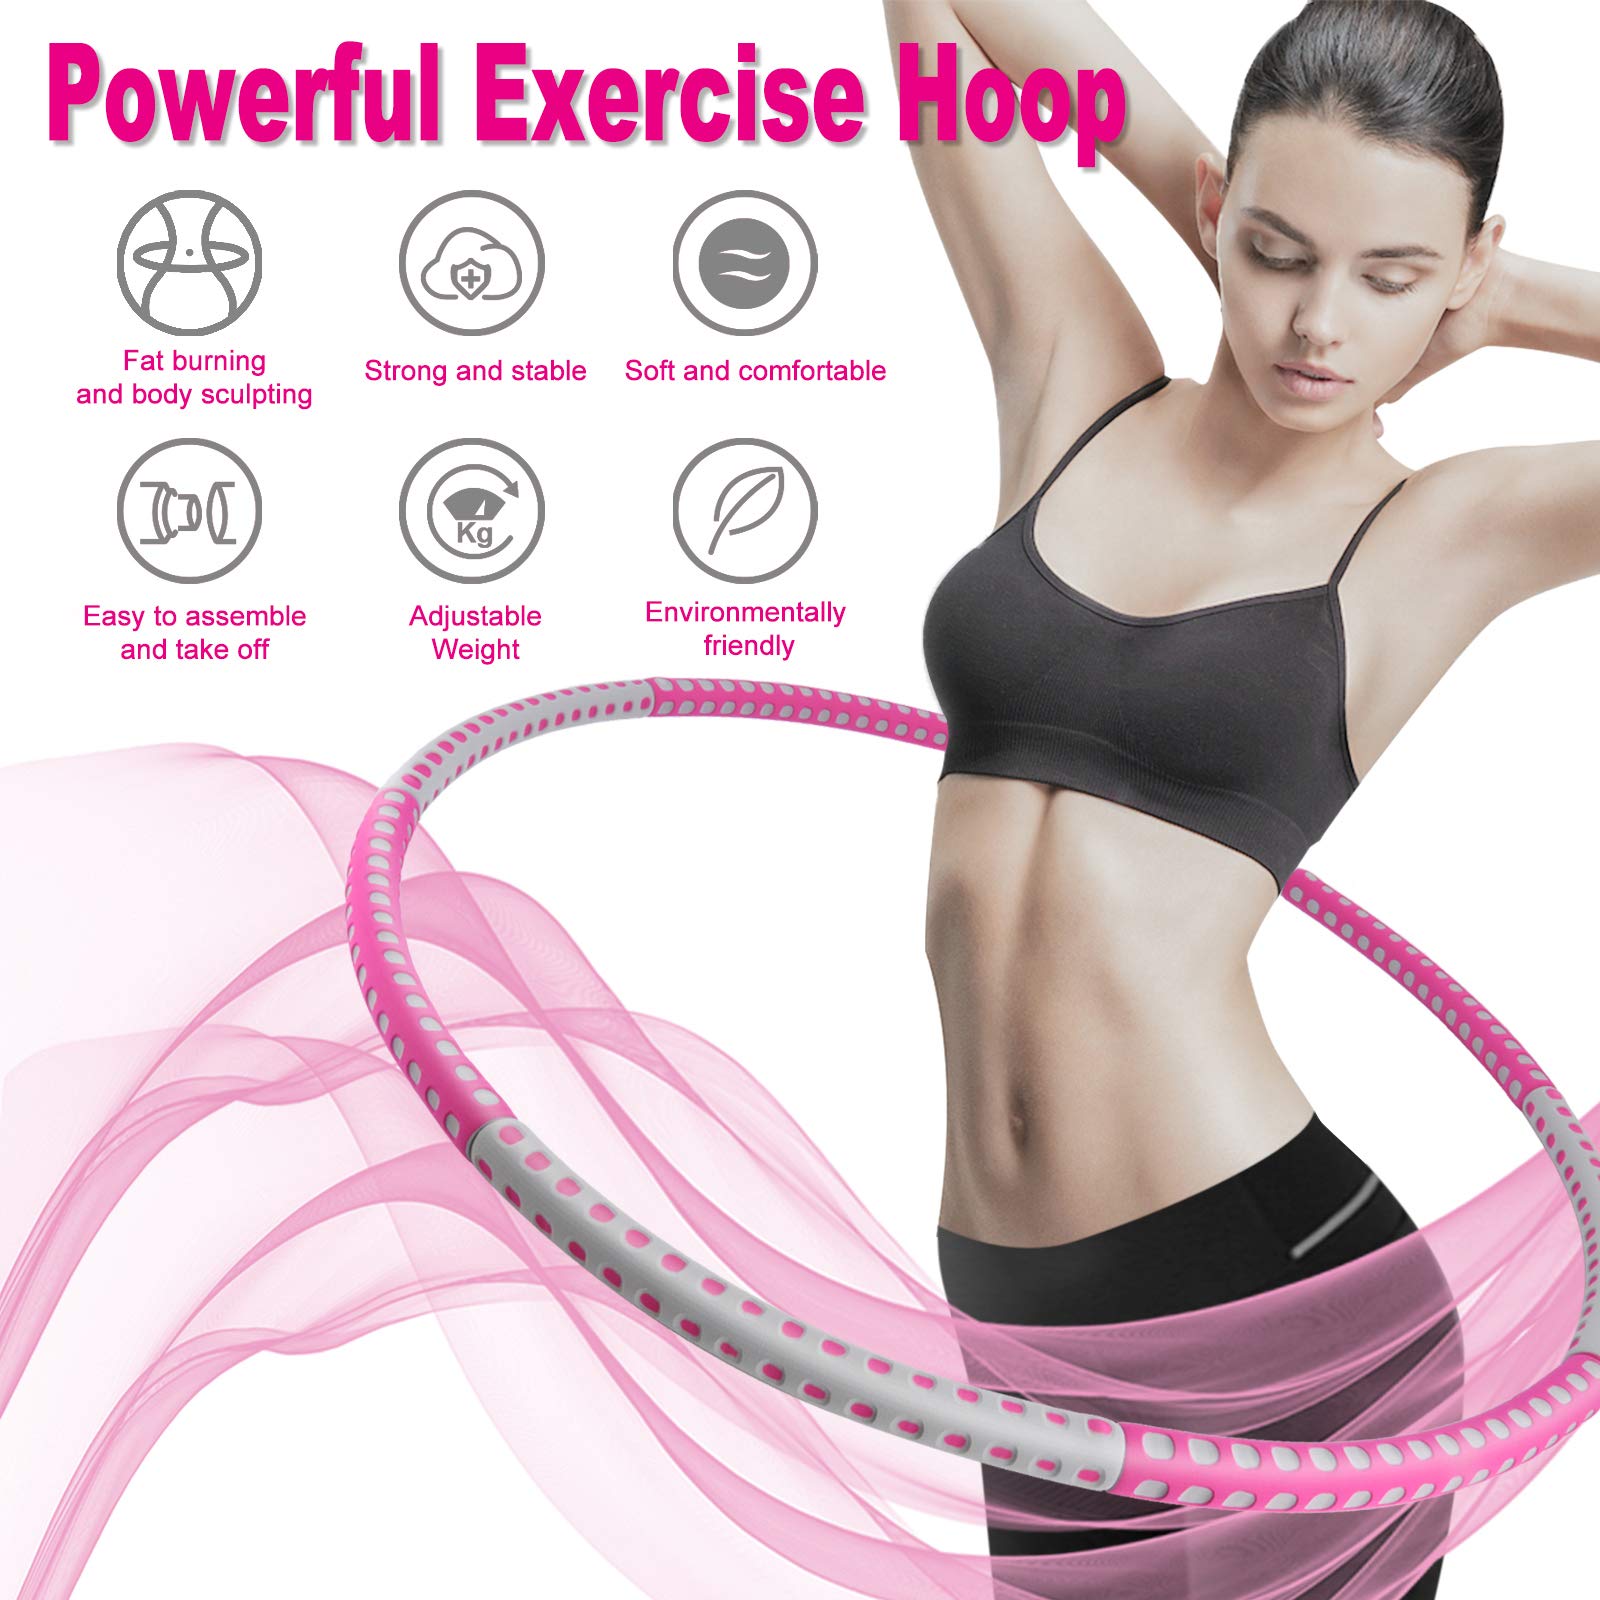 Zenmarkt Smart Weighted Hula Hoop for Adults - 8 Section Detachable Exercise Hula Hoop for Women, Soft Padded Exercise Hoop, Portable and Adjustable Fitness Circle for Gym Home Workouts